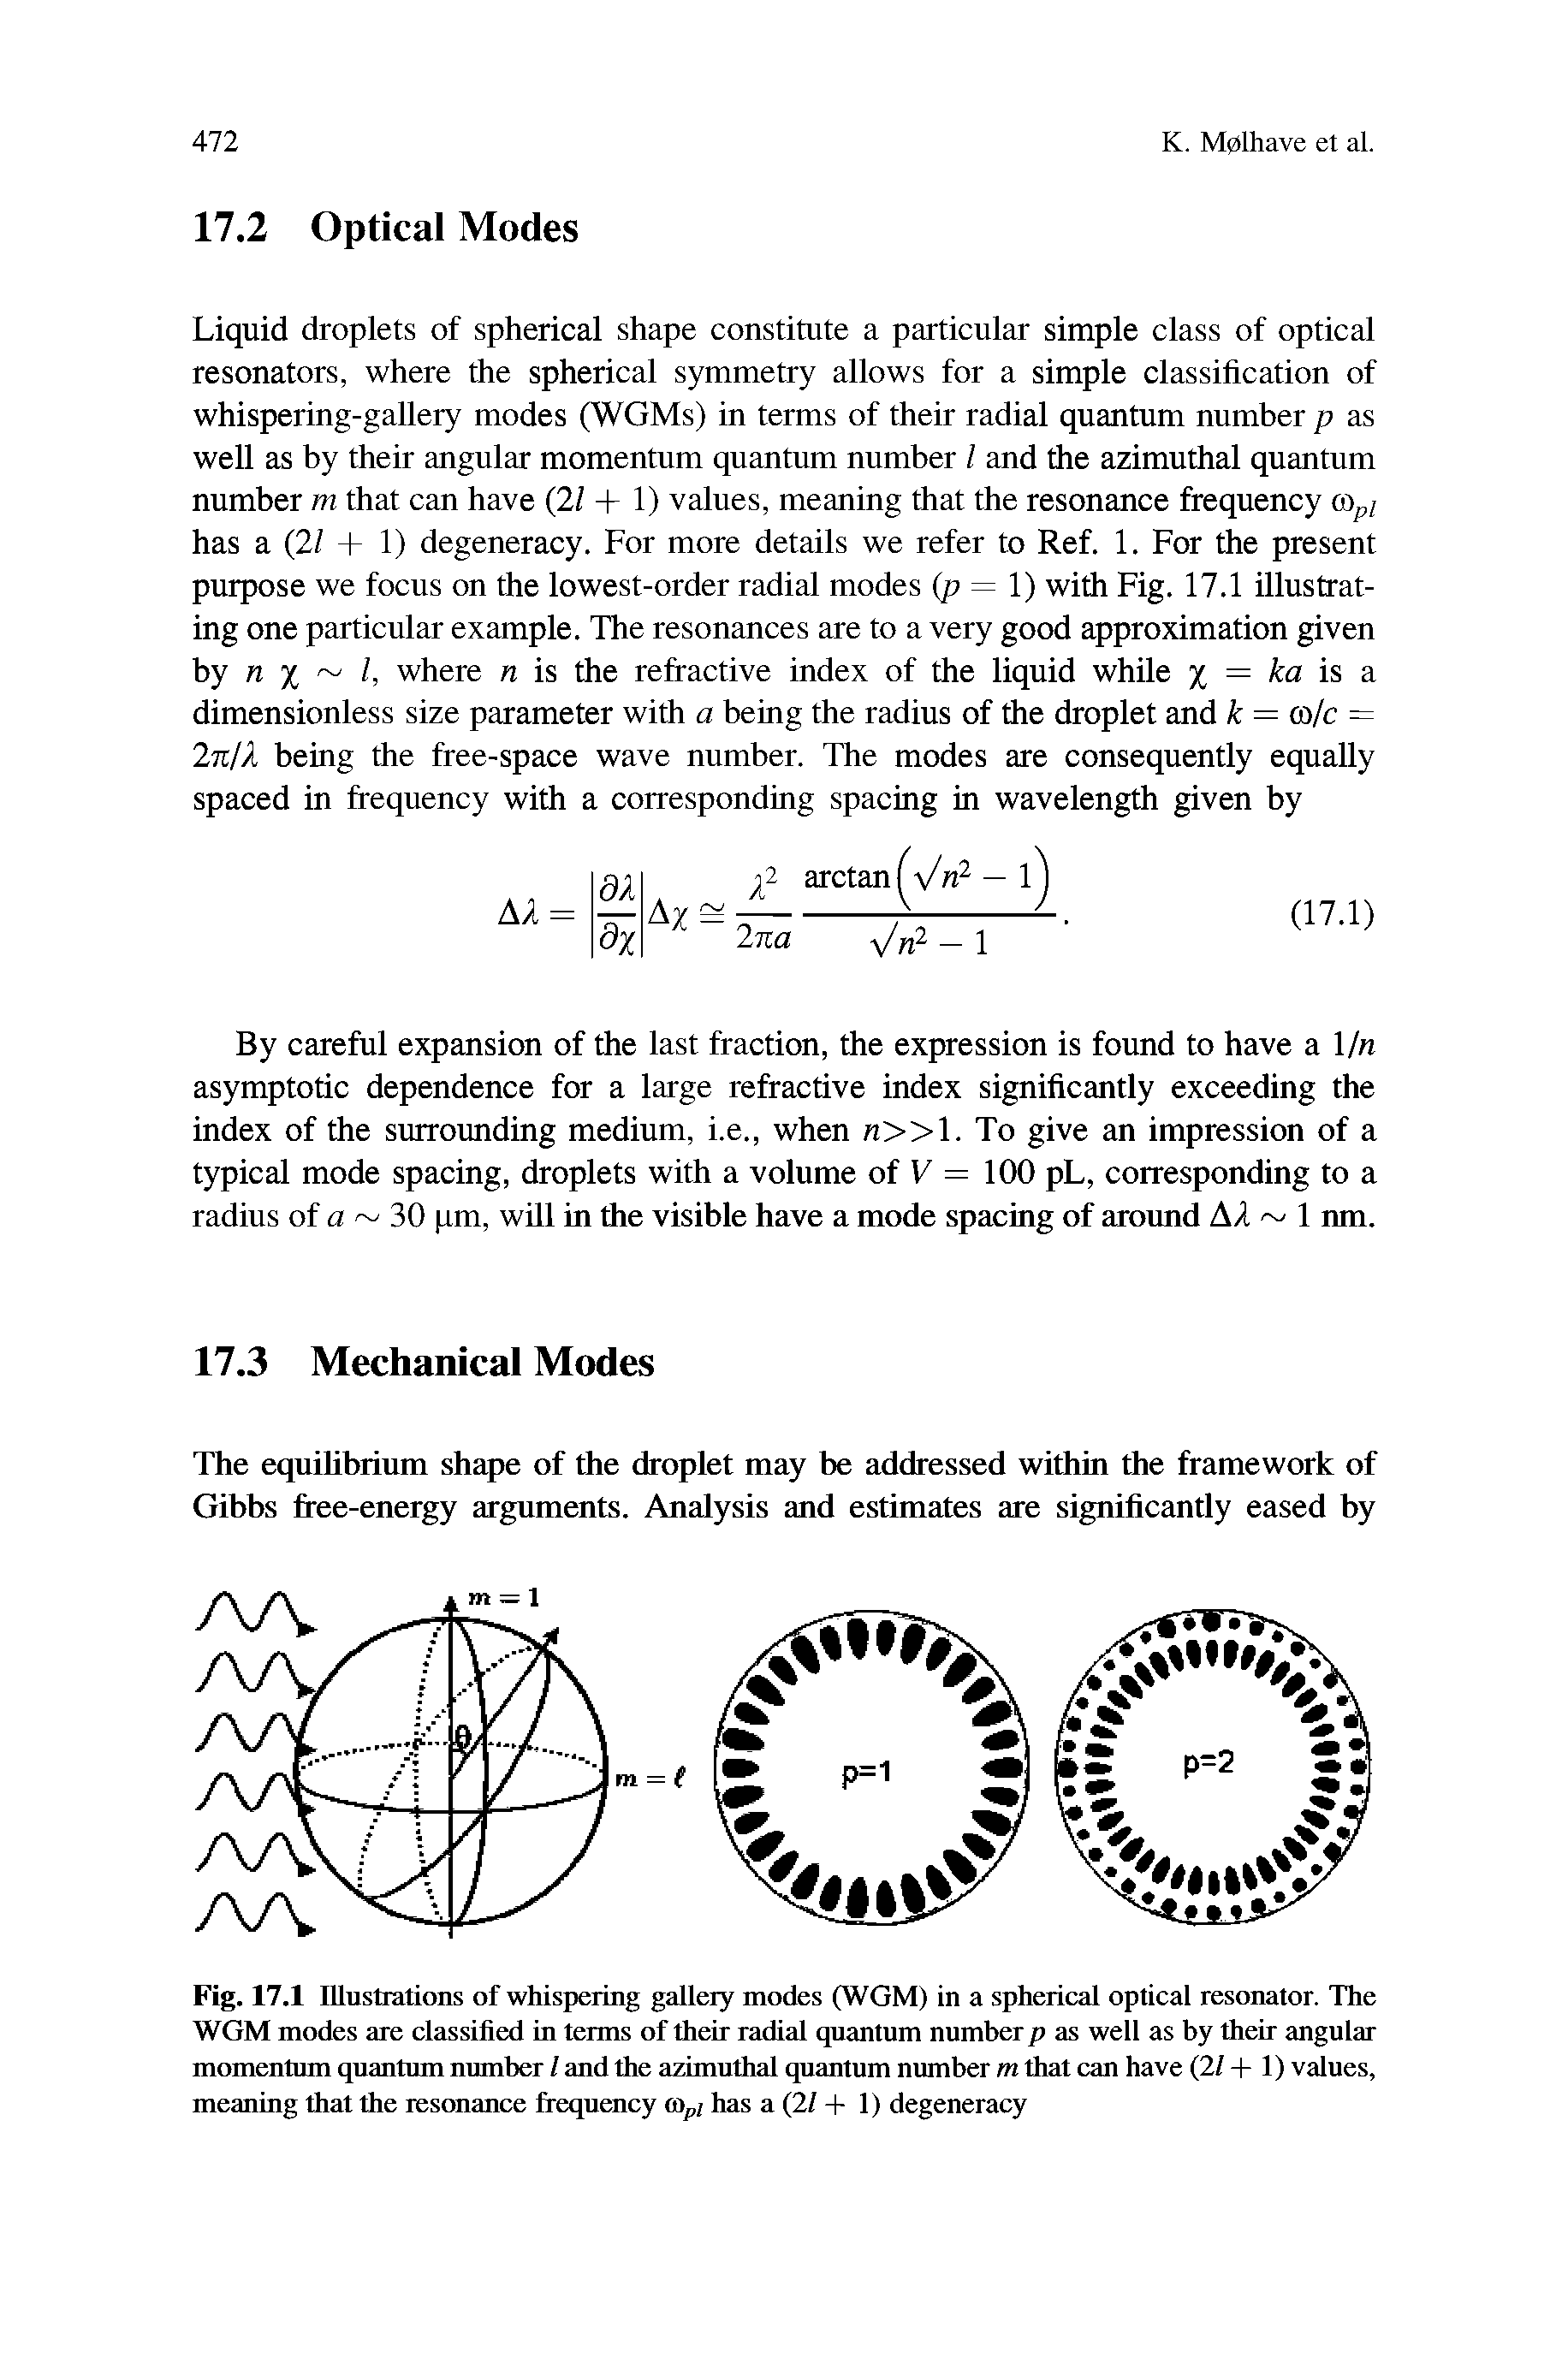 Fig. 17.1 Illustrations of whispering gallery modes (WGM) in a spherical optical resonator. The WGM modes are classified in terms of their radial quantum number p as well as by their angular momentum quantum number / and the azimuthal quantum number m that can have (21+ 1) values, meaning that the resonance frequency ( ,/ has a (2/ + 1) degeneracy...